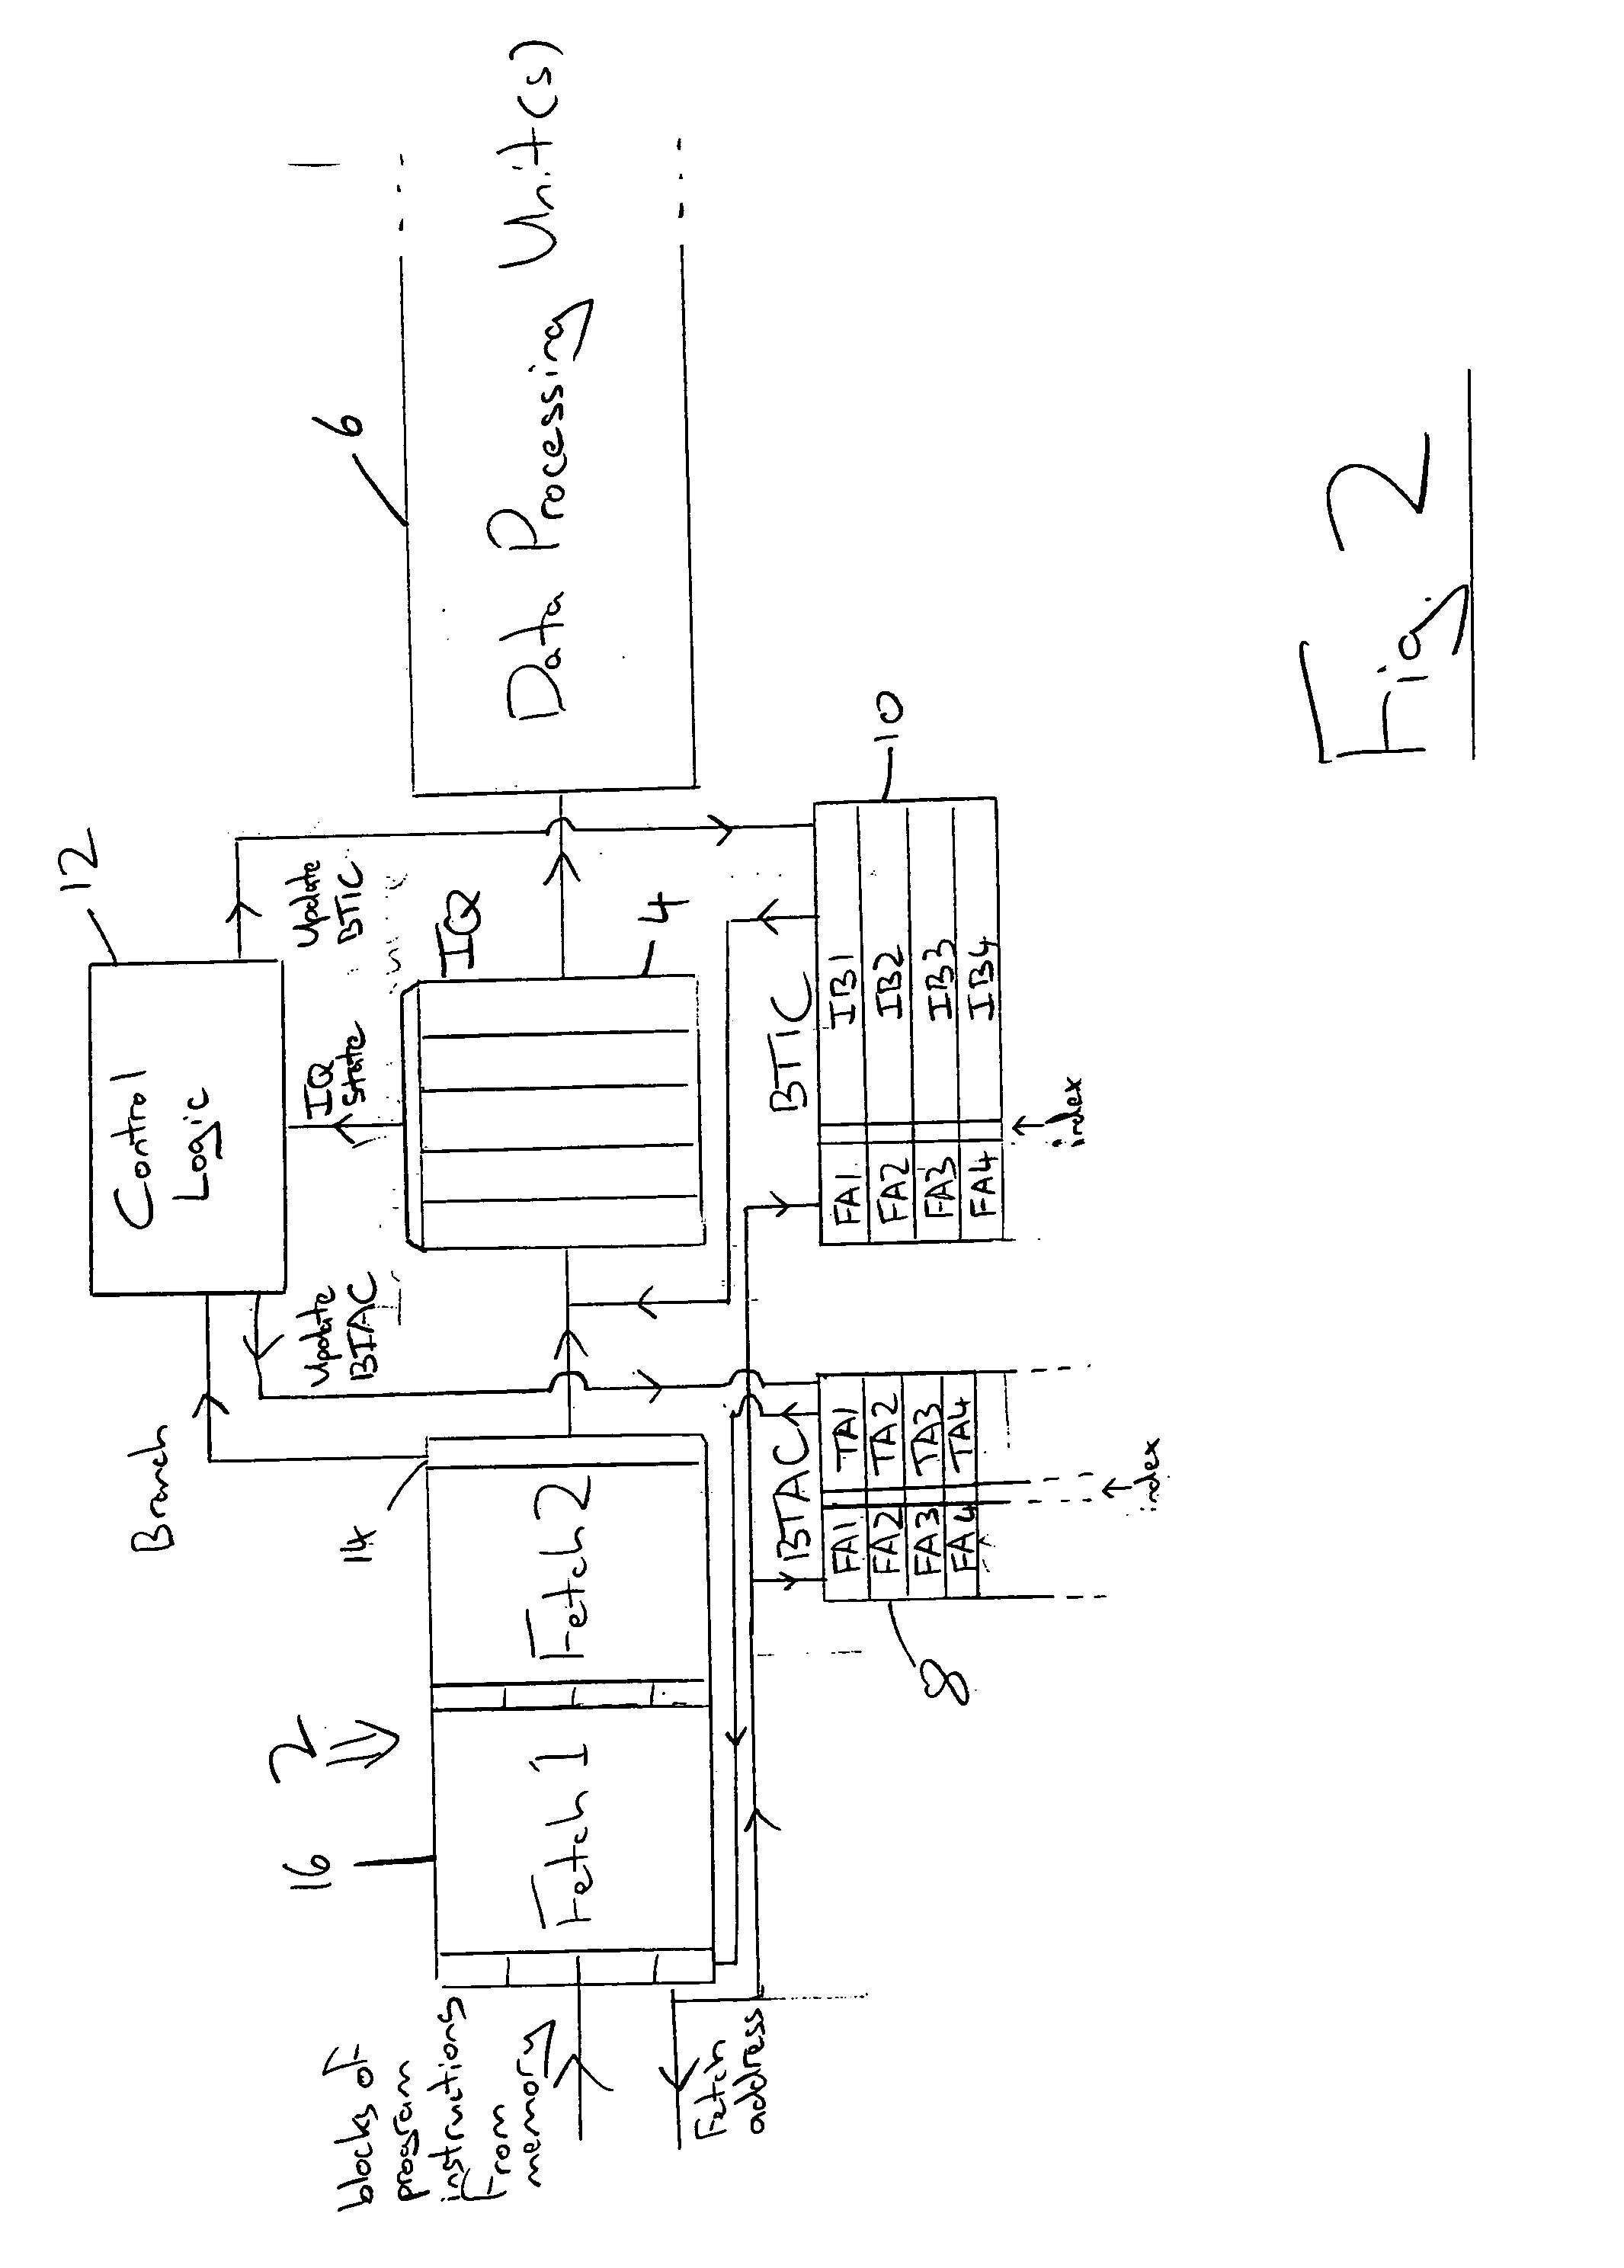 Control of a branch target cache within a data processing system